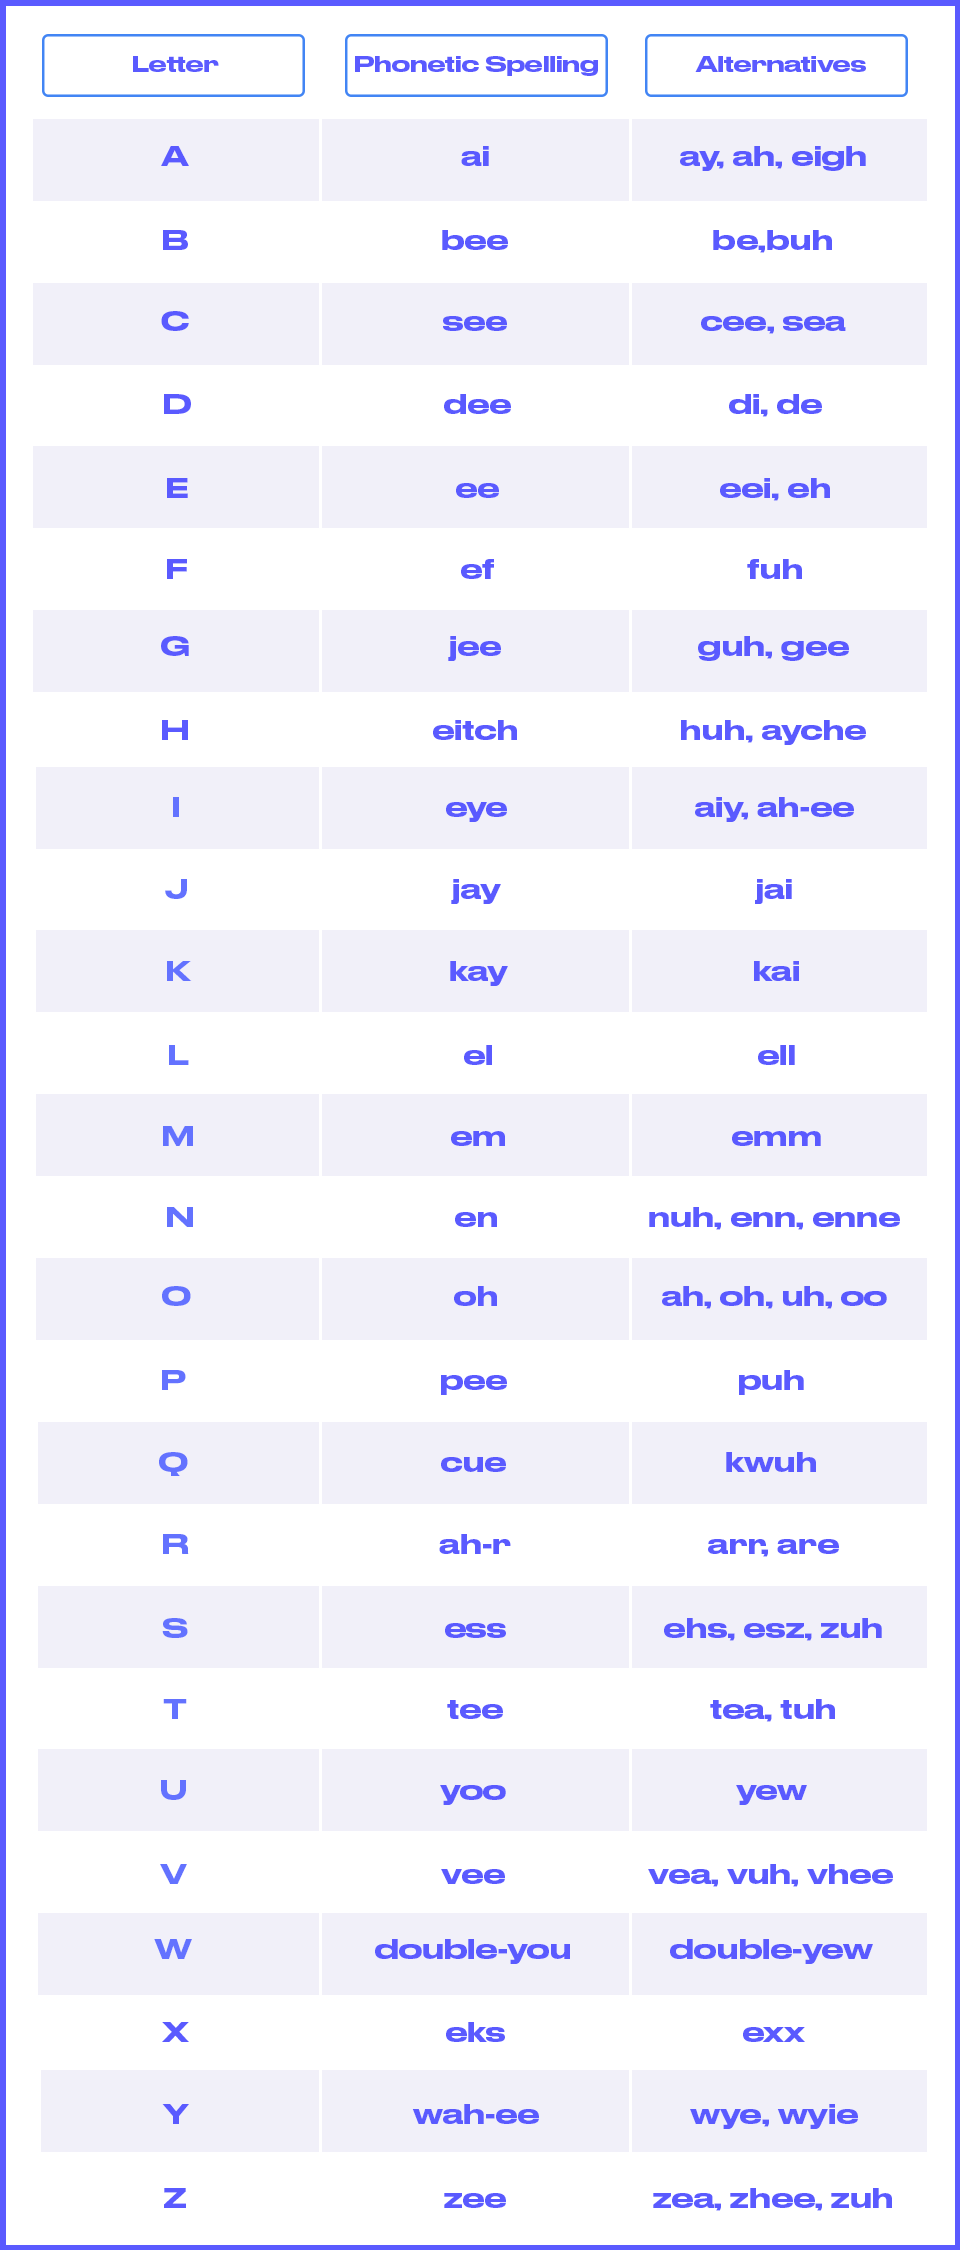 2_-_PHONETIC_SPELLING_cheat_sheet.png